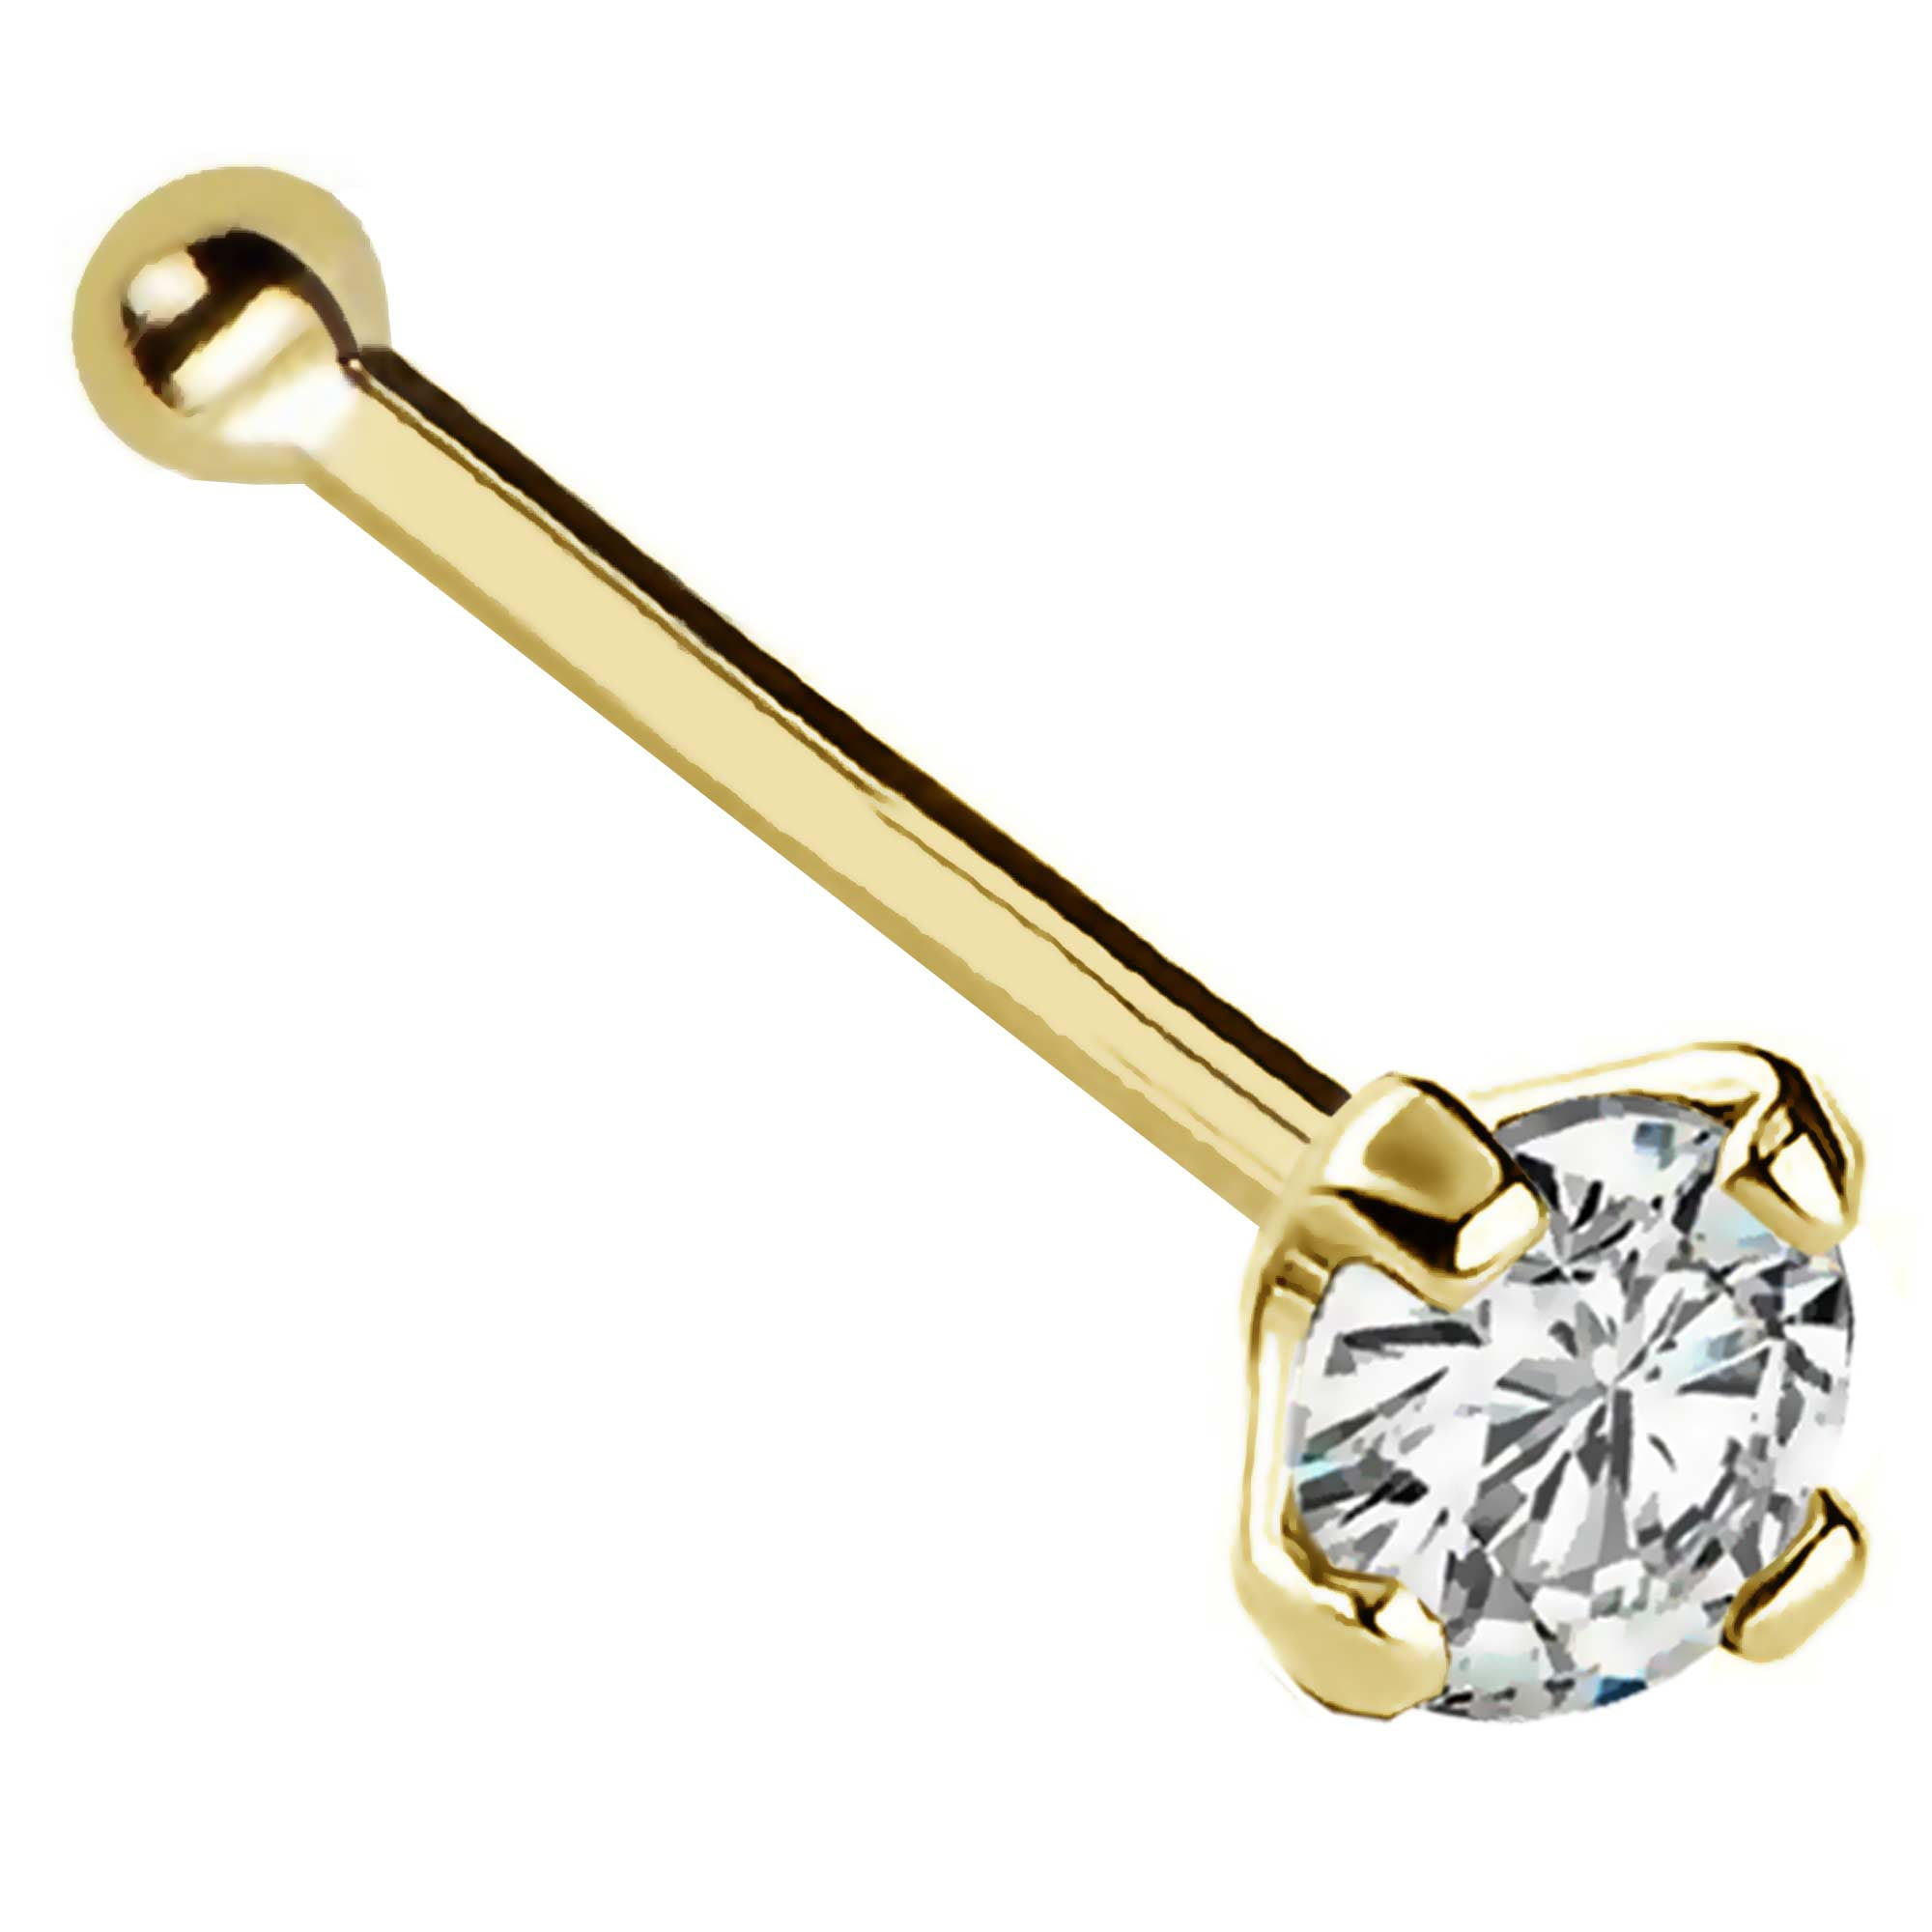 22G REAL GENIUNE SOLID 9K YELLOW GOLD 1.5MM PINK CZ DIAMONTE BALL END NOSE STUD